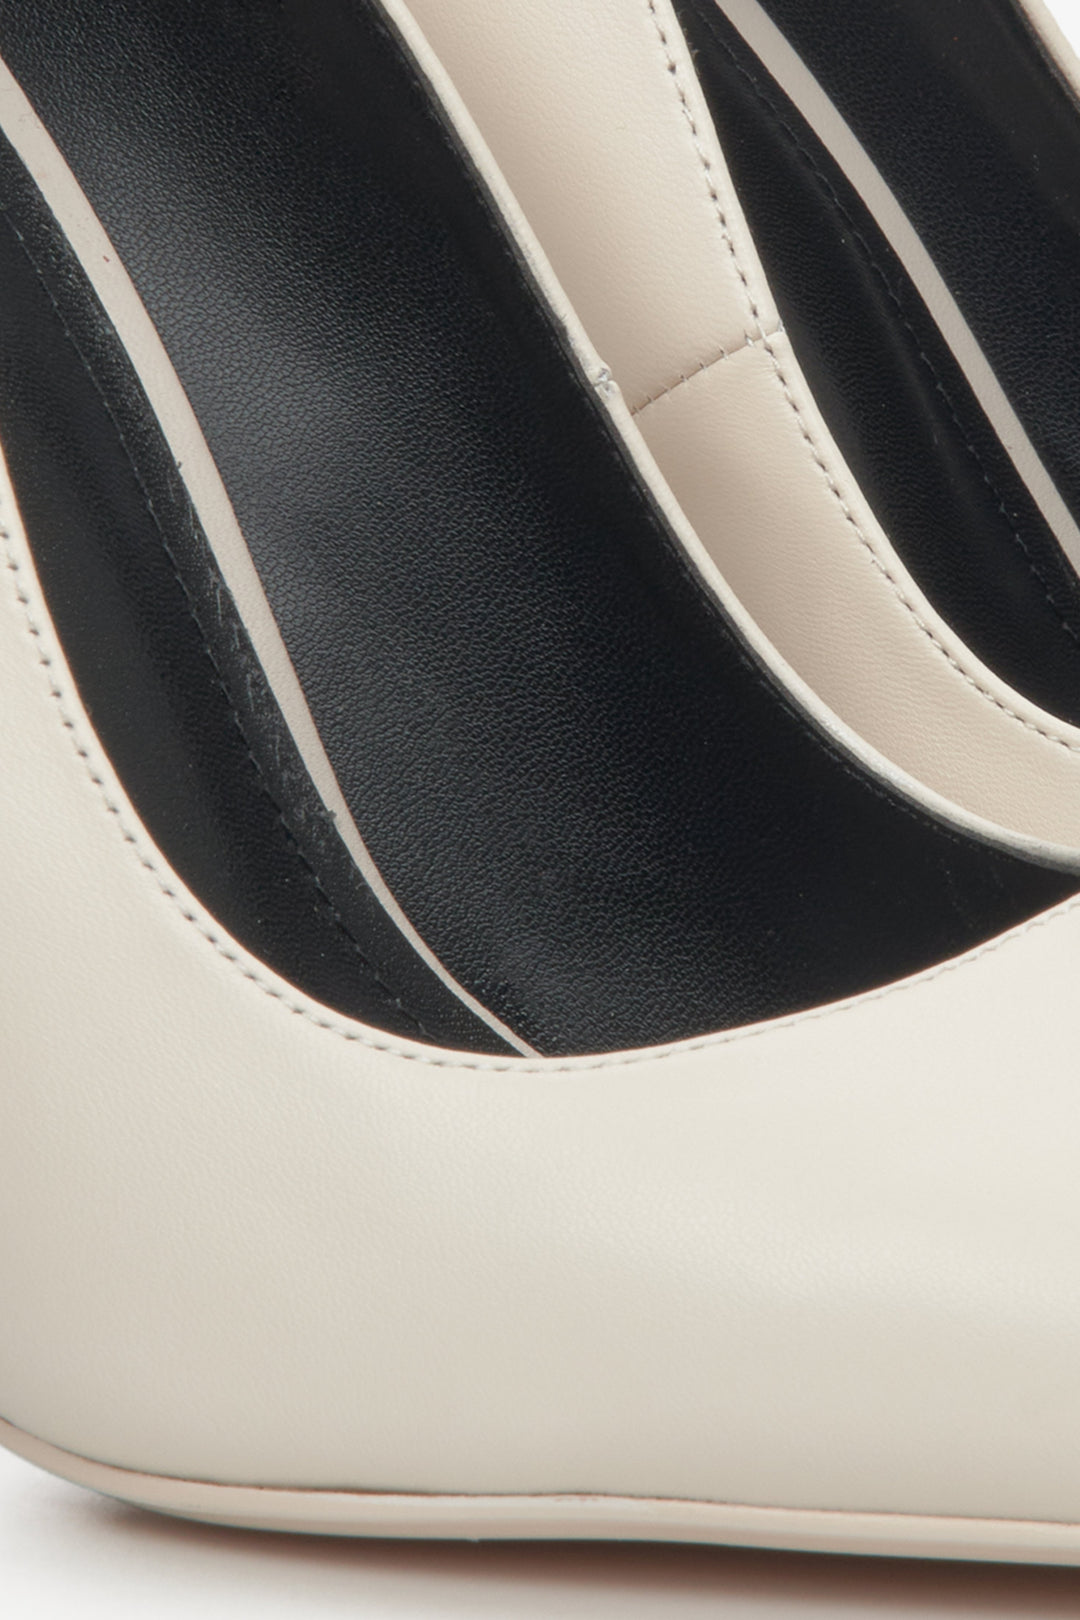 Women's white high heels by Estro - close-up on the details.